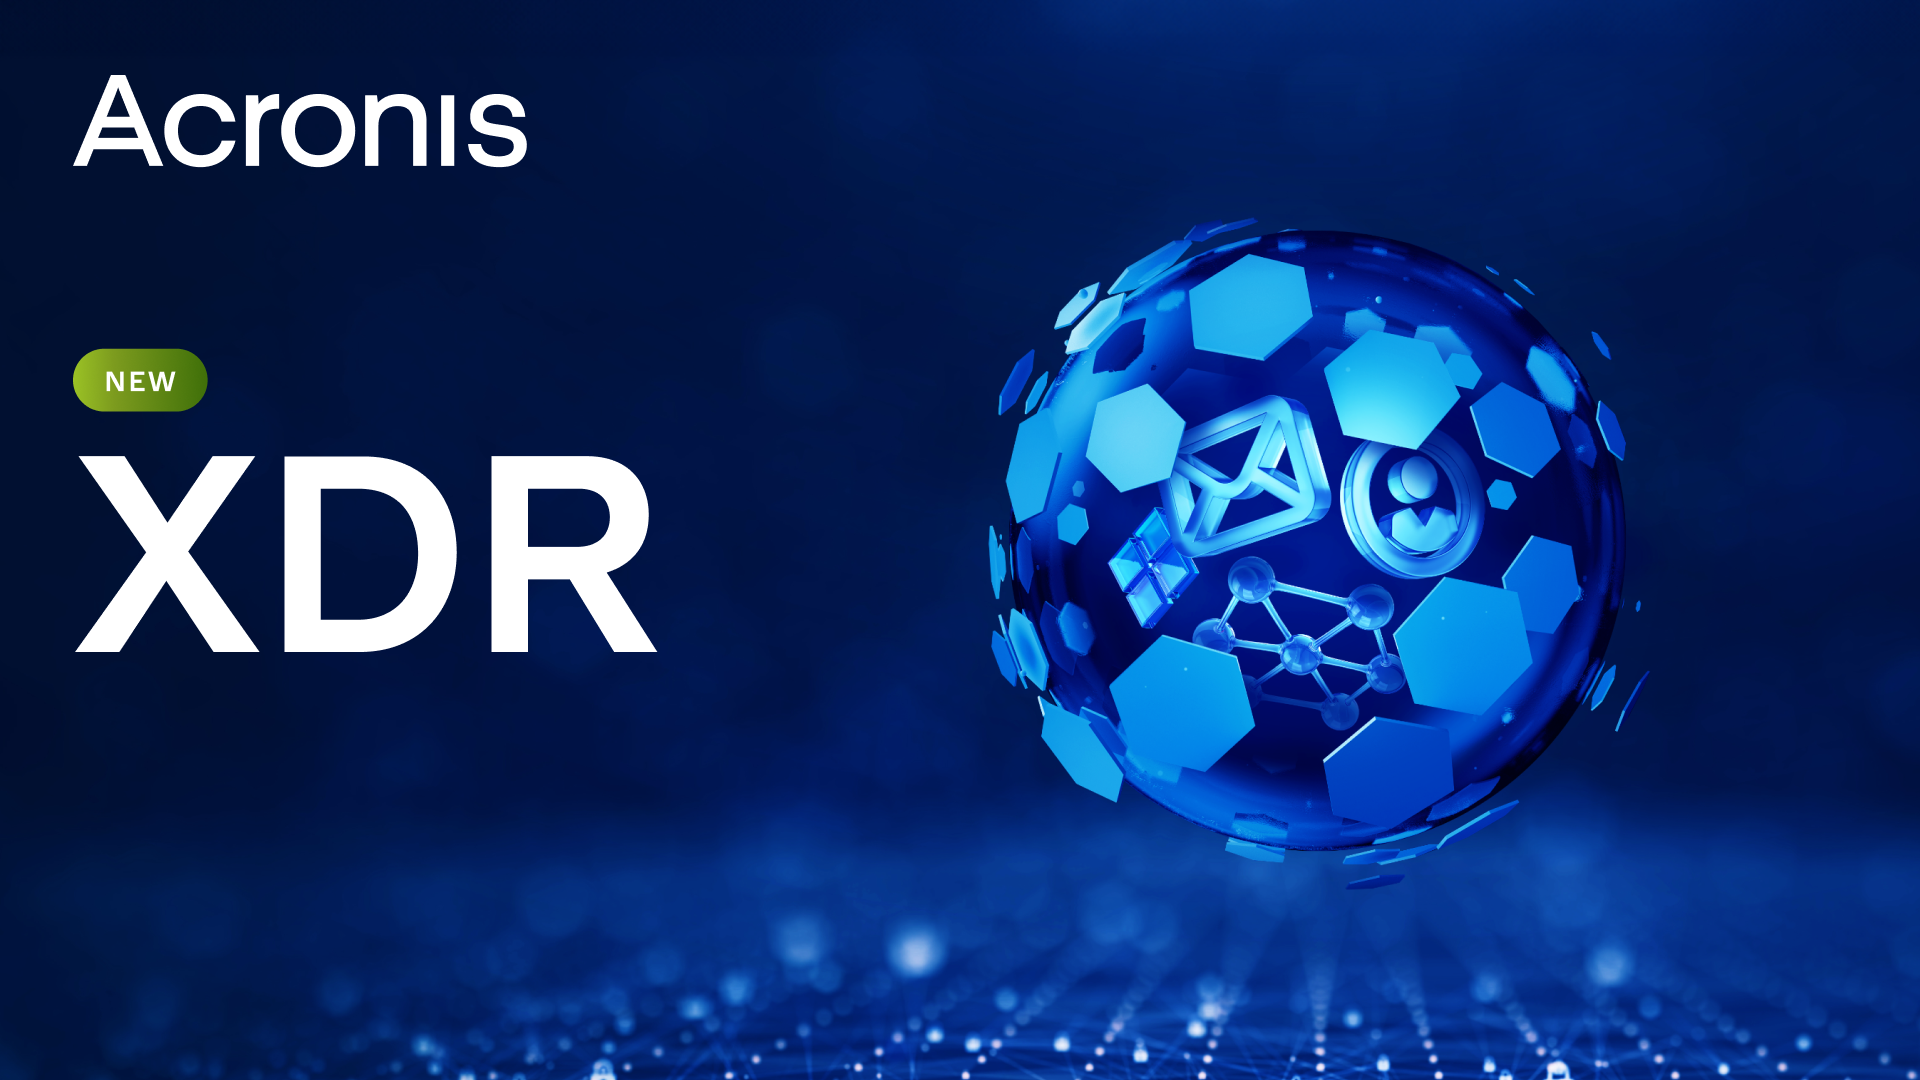 Featured image for “Acronis XDR: A Game-Changer for MSP Cybersecurity”